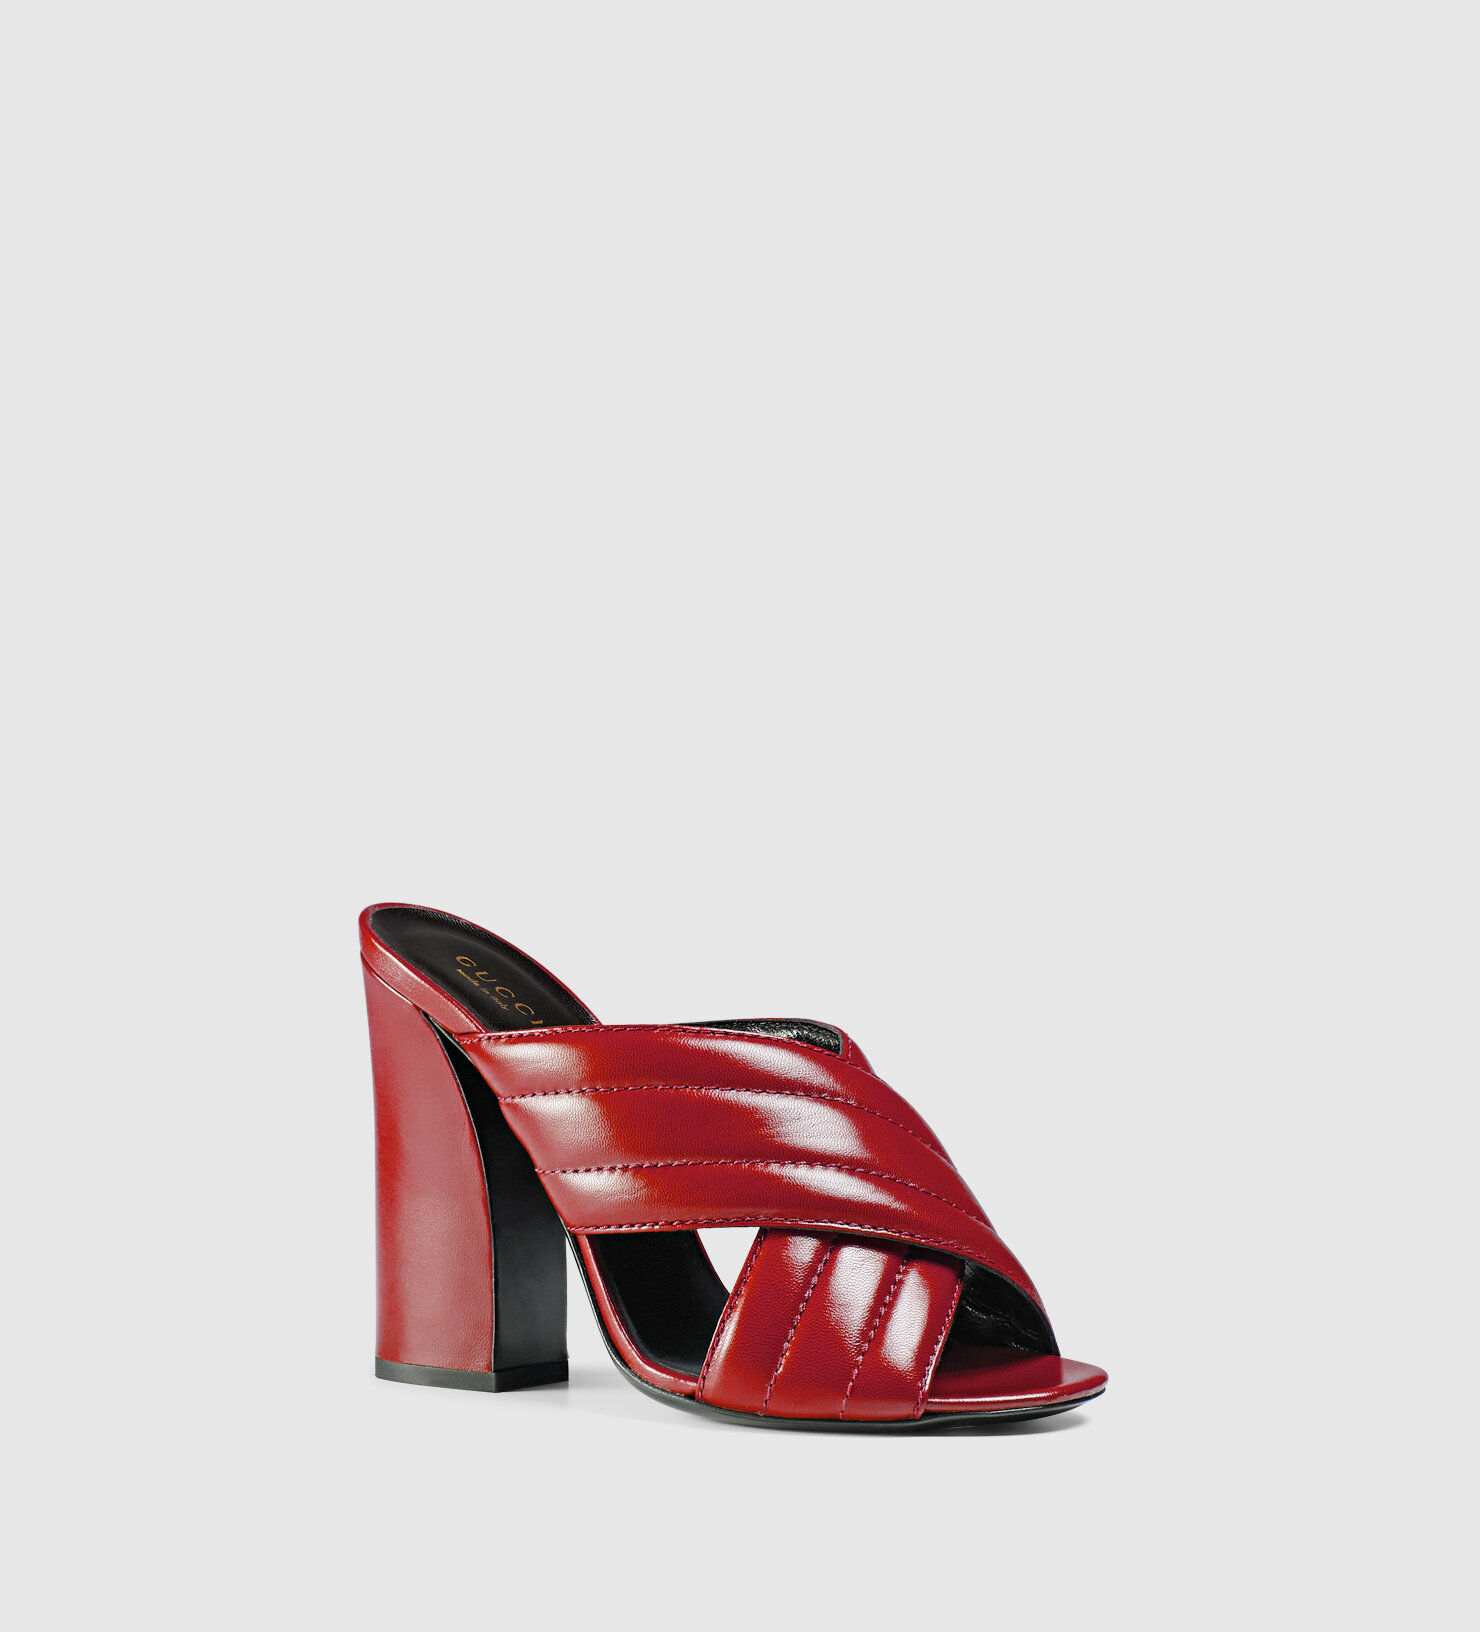 Gucci Sylvia 110 Mules in Hibiscus Red Leather — UFO No More